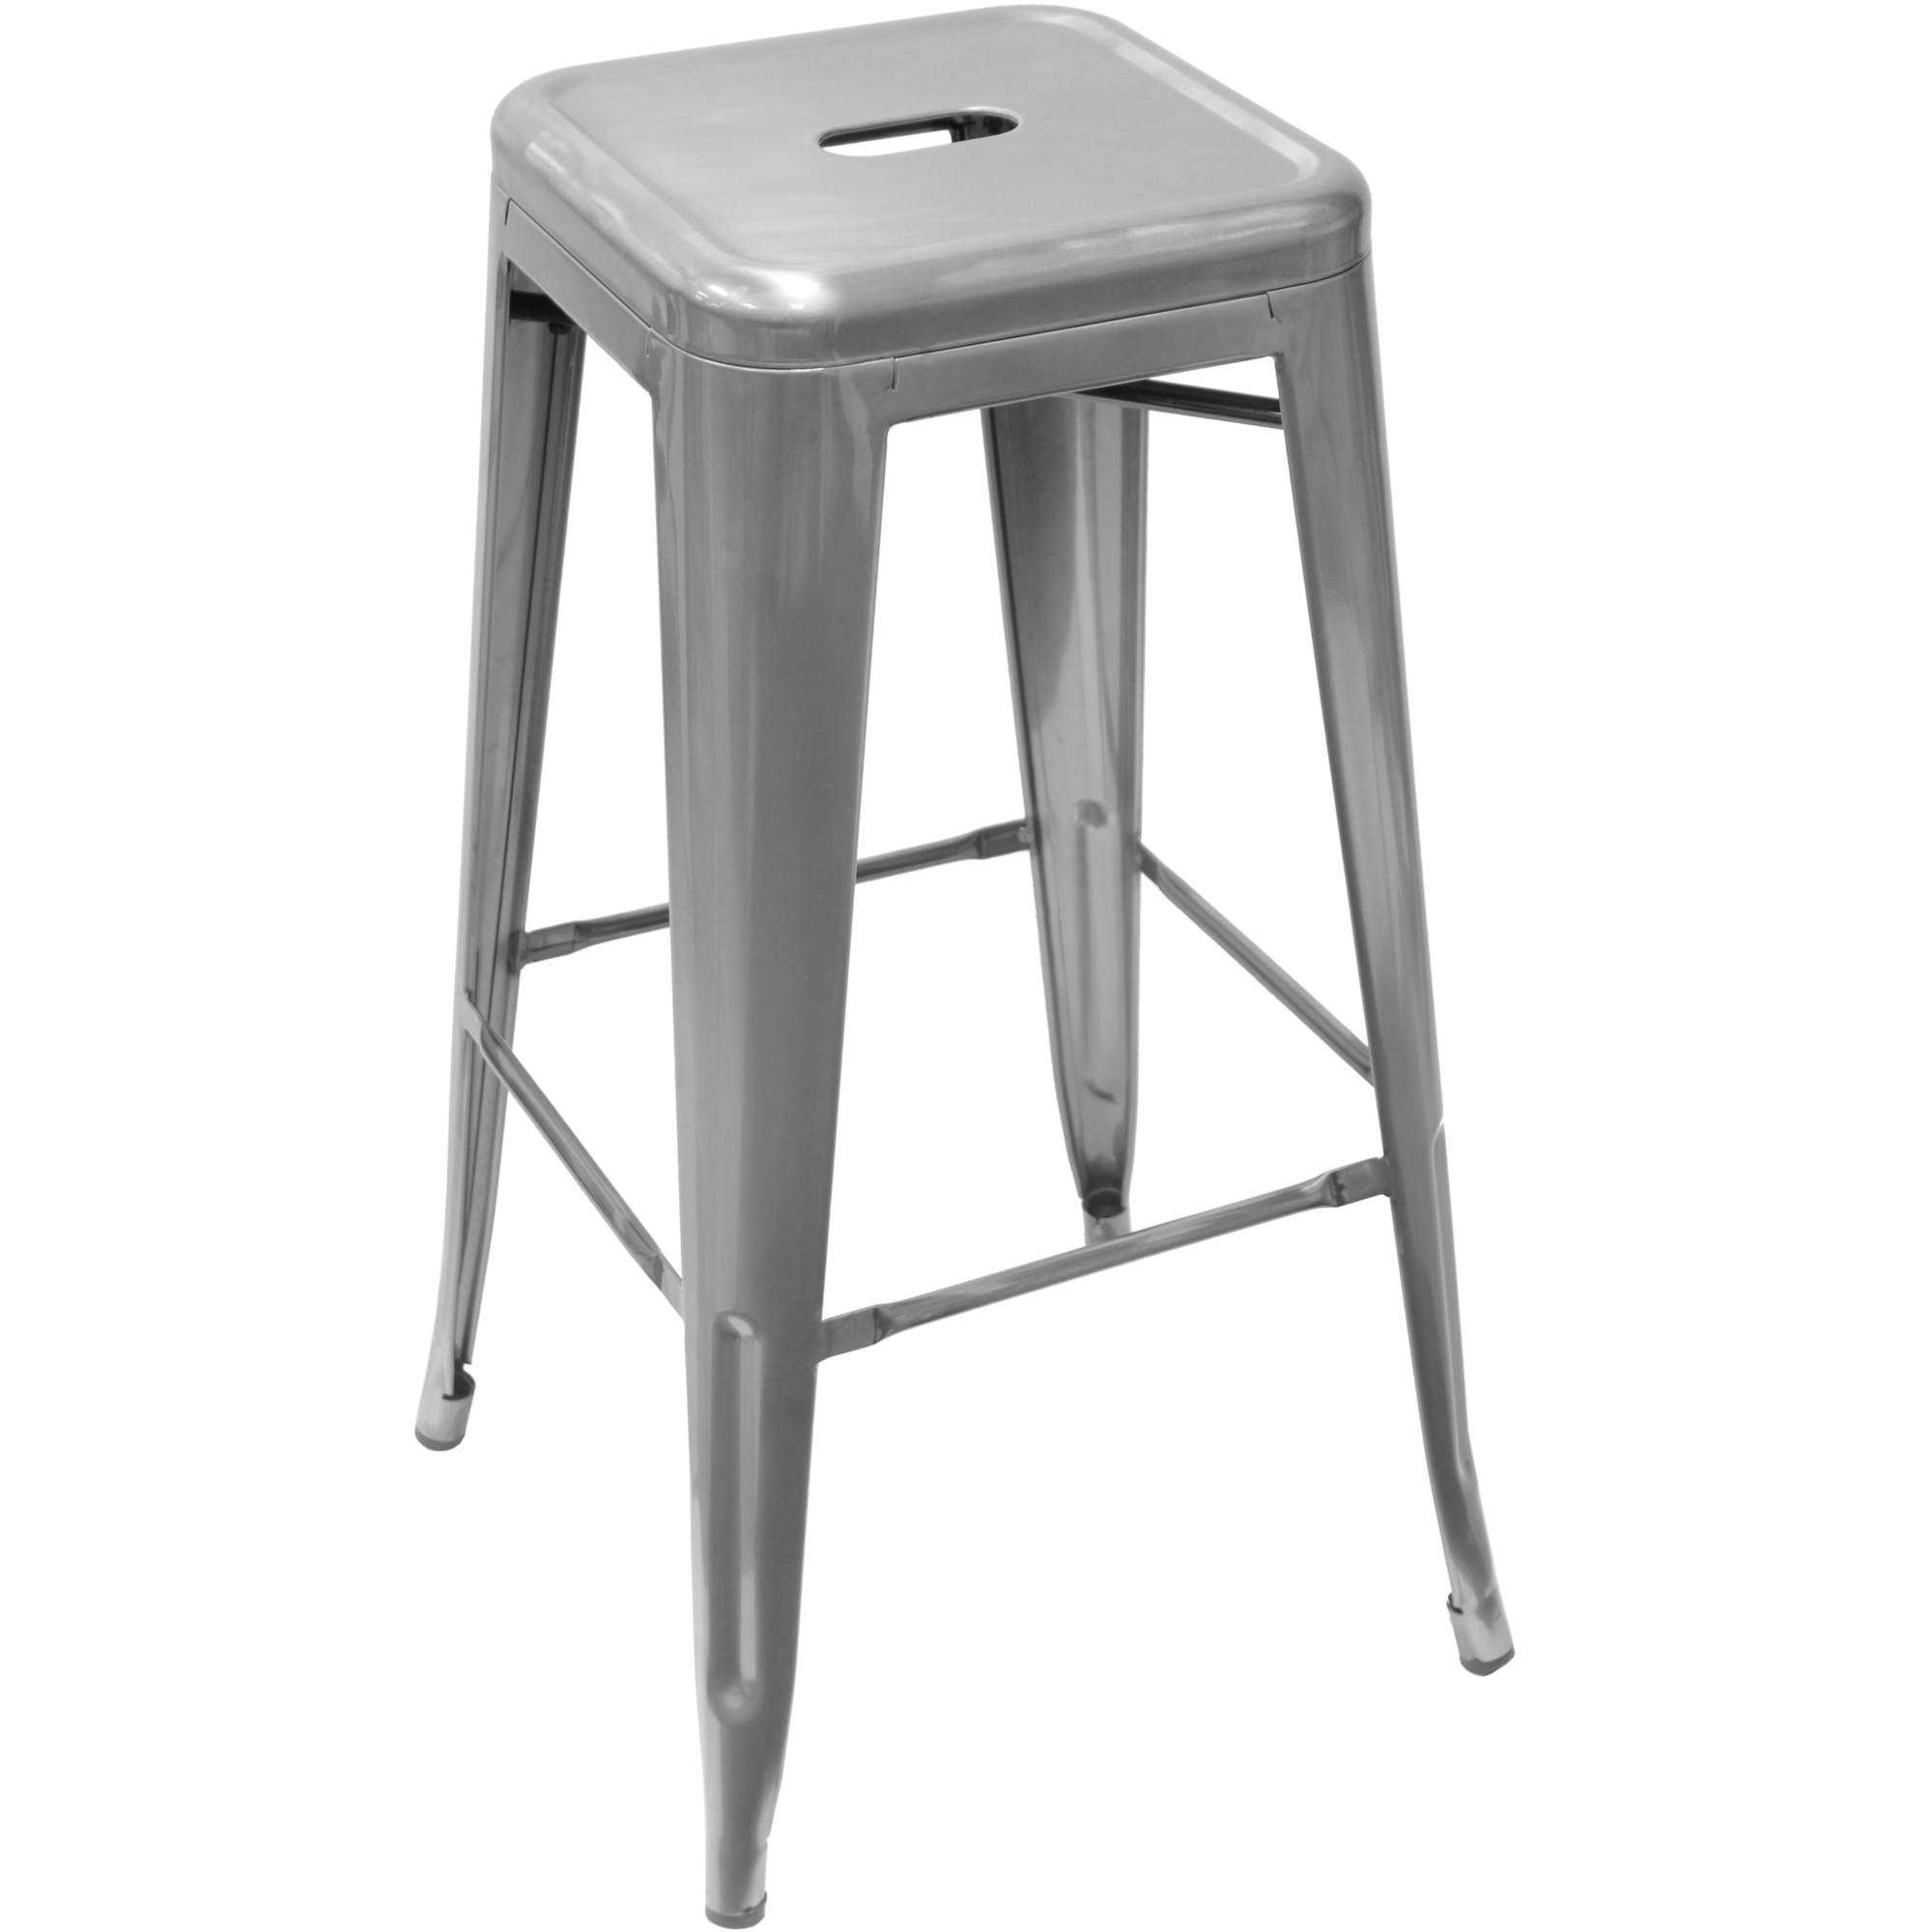 Better Homes & Gardens 29" Cafe Stool, Multiple Colors - image 1 of 2